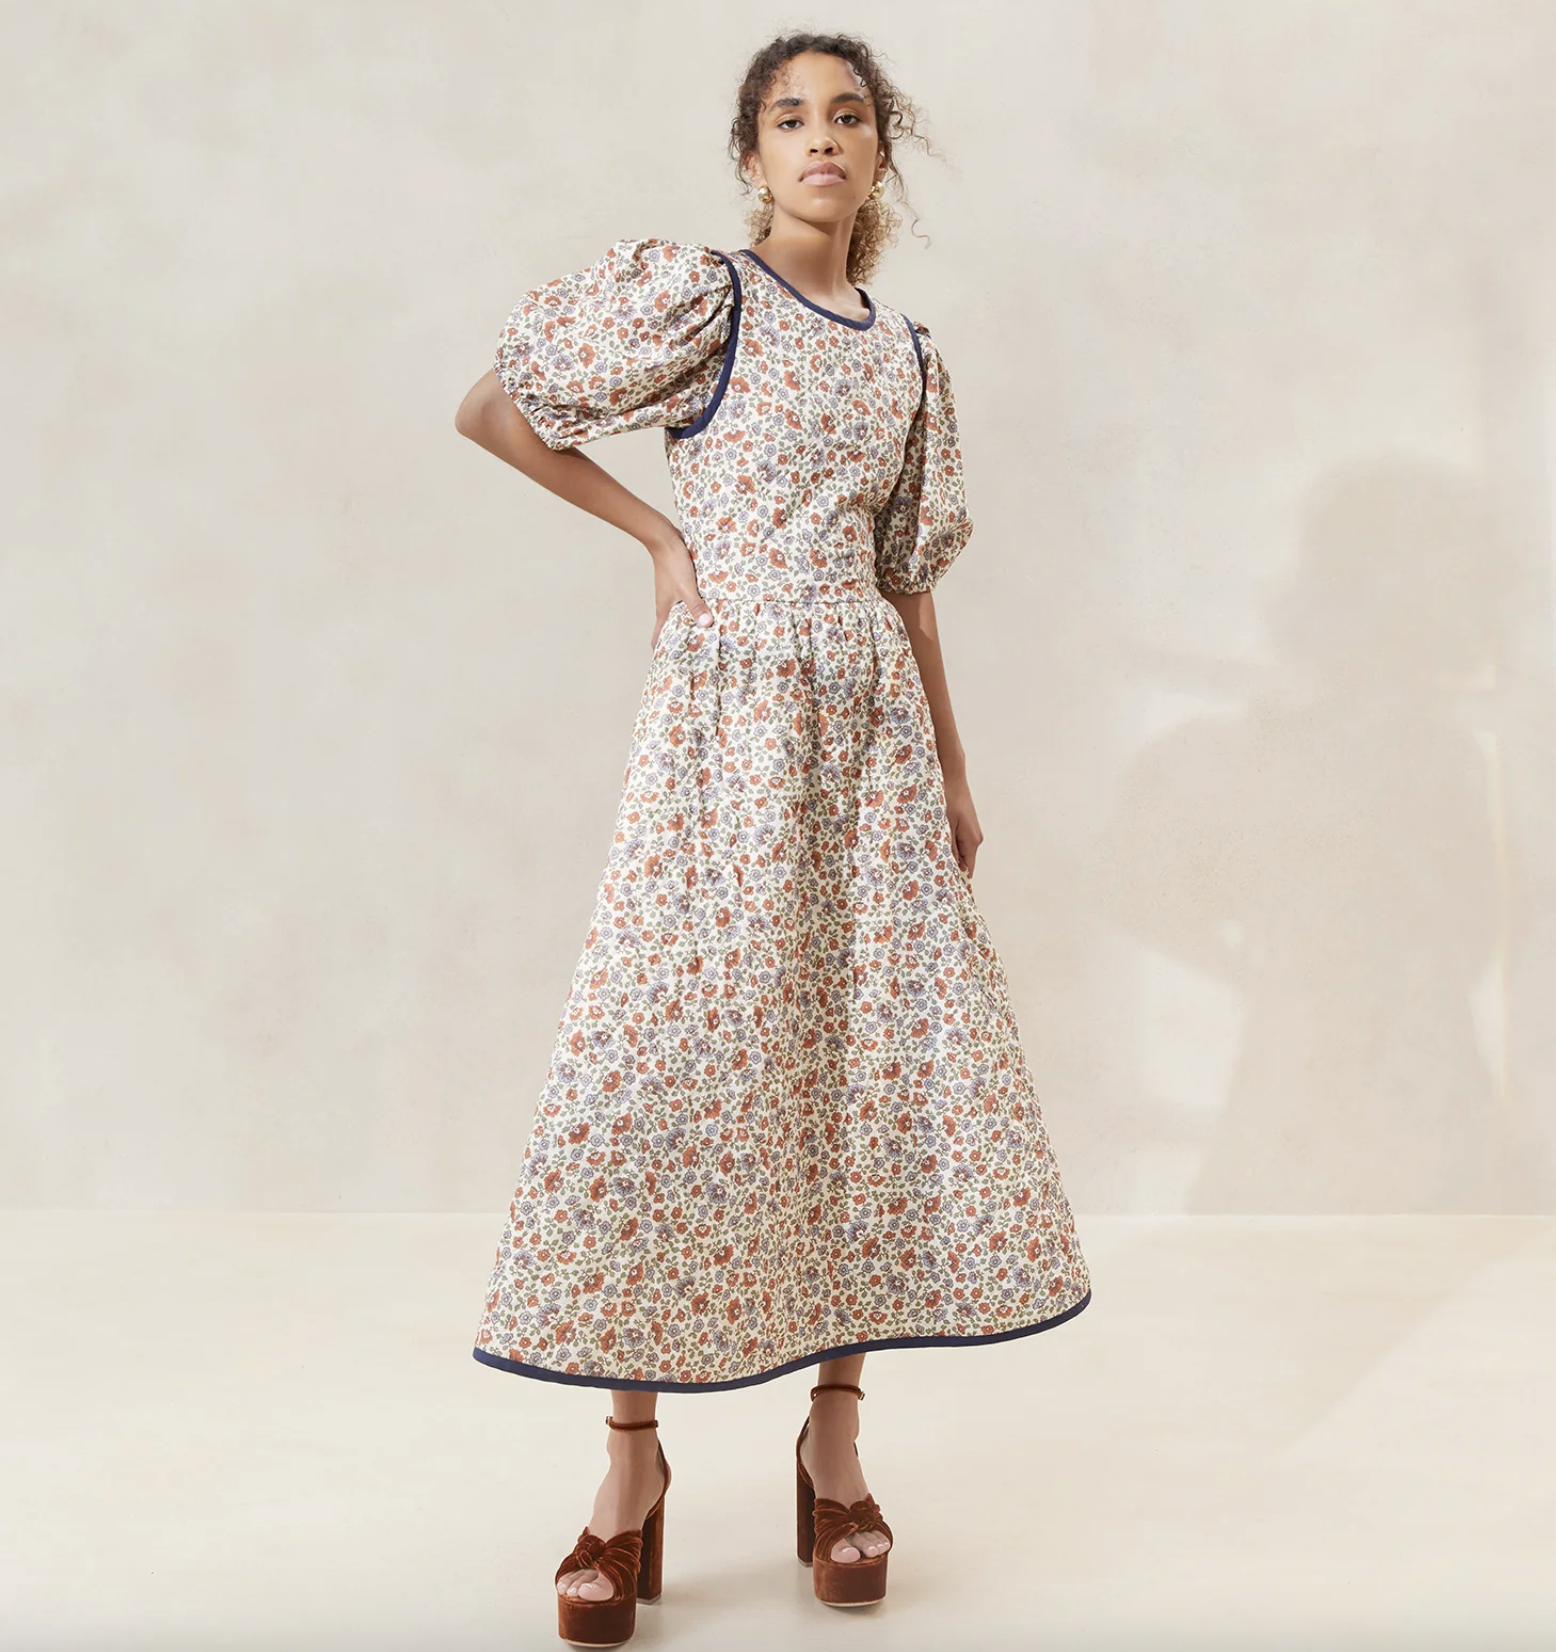 Check Out the Best Mid-Size to Plus-Size Dresses for Spring | CafeMom.com